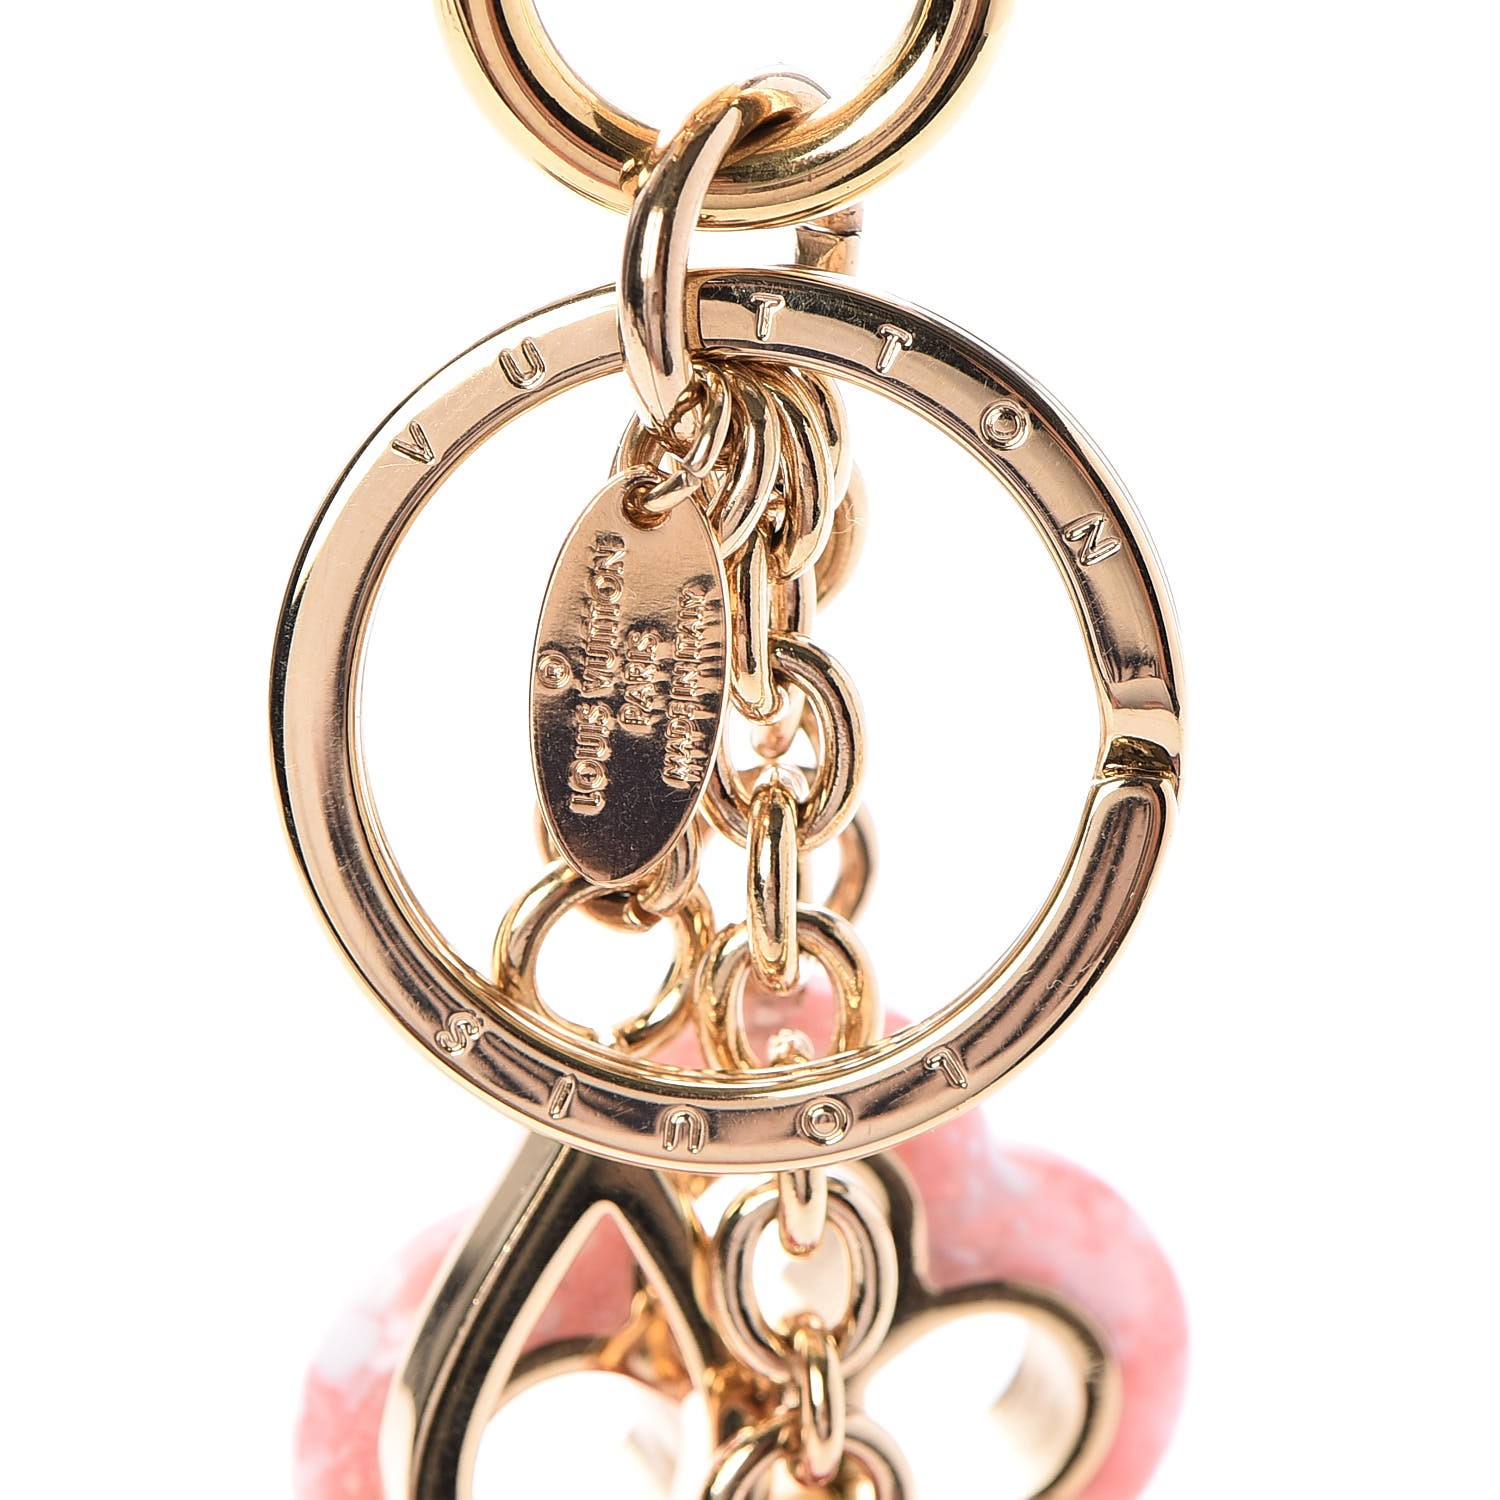 Louis Vuitton Colorline Chain Bag Charm And Key Holder